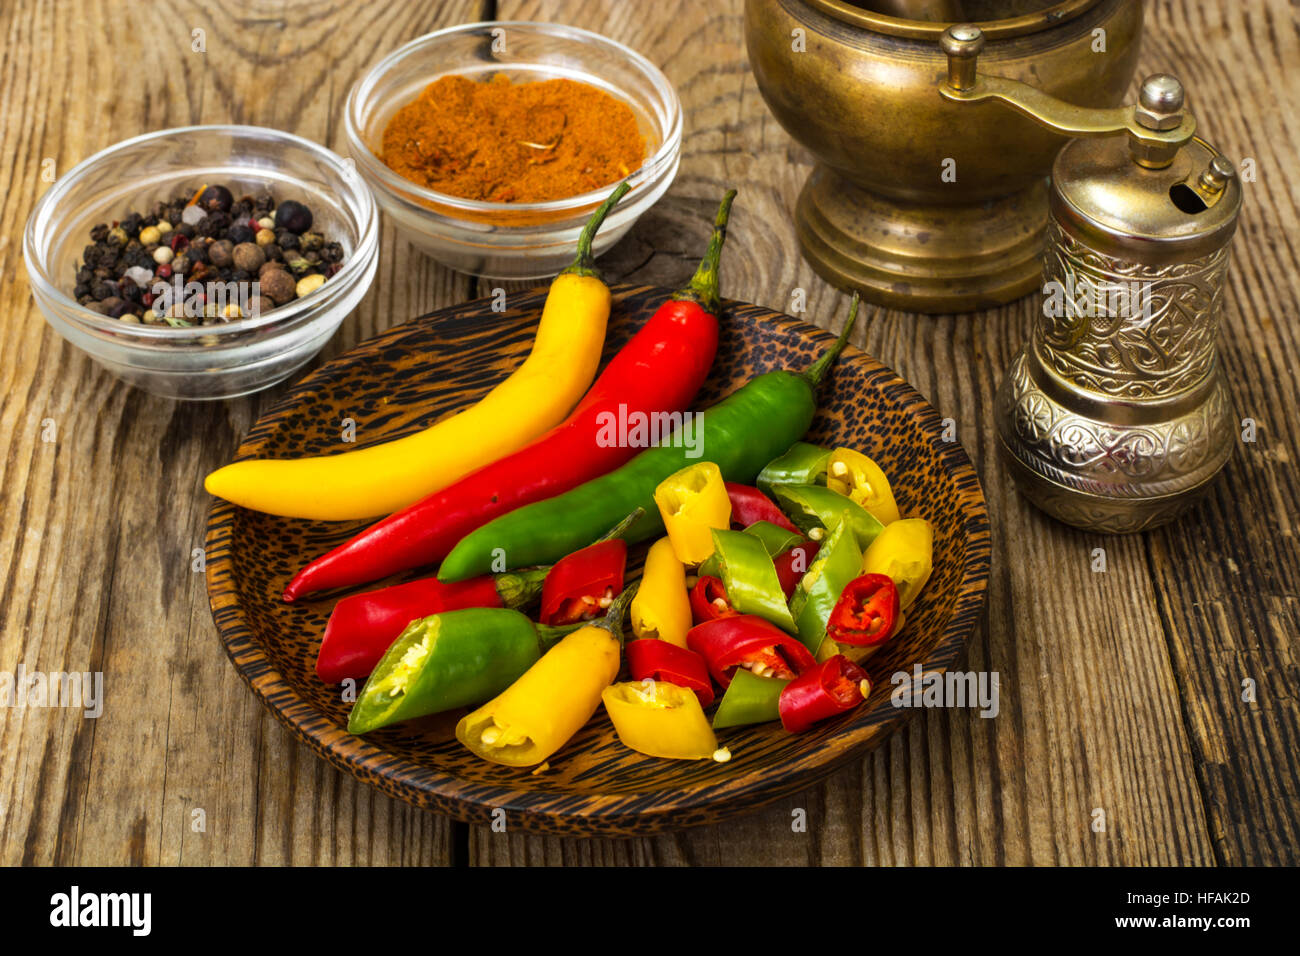 Colorful mix of the freshest and hottest chili peppers Stock Photo